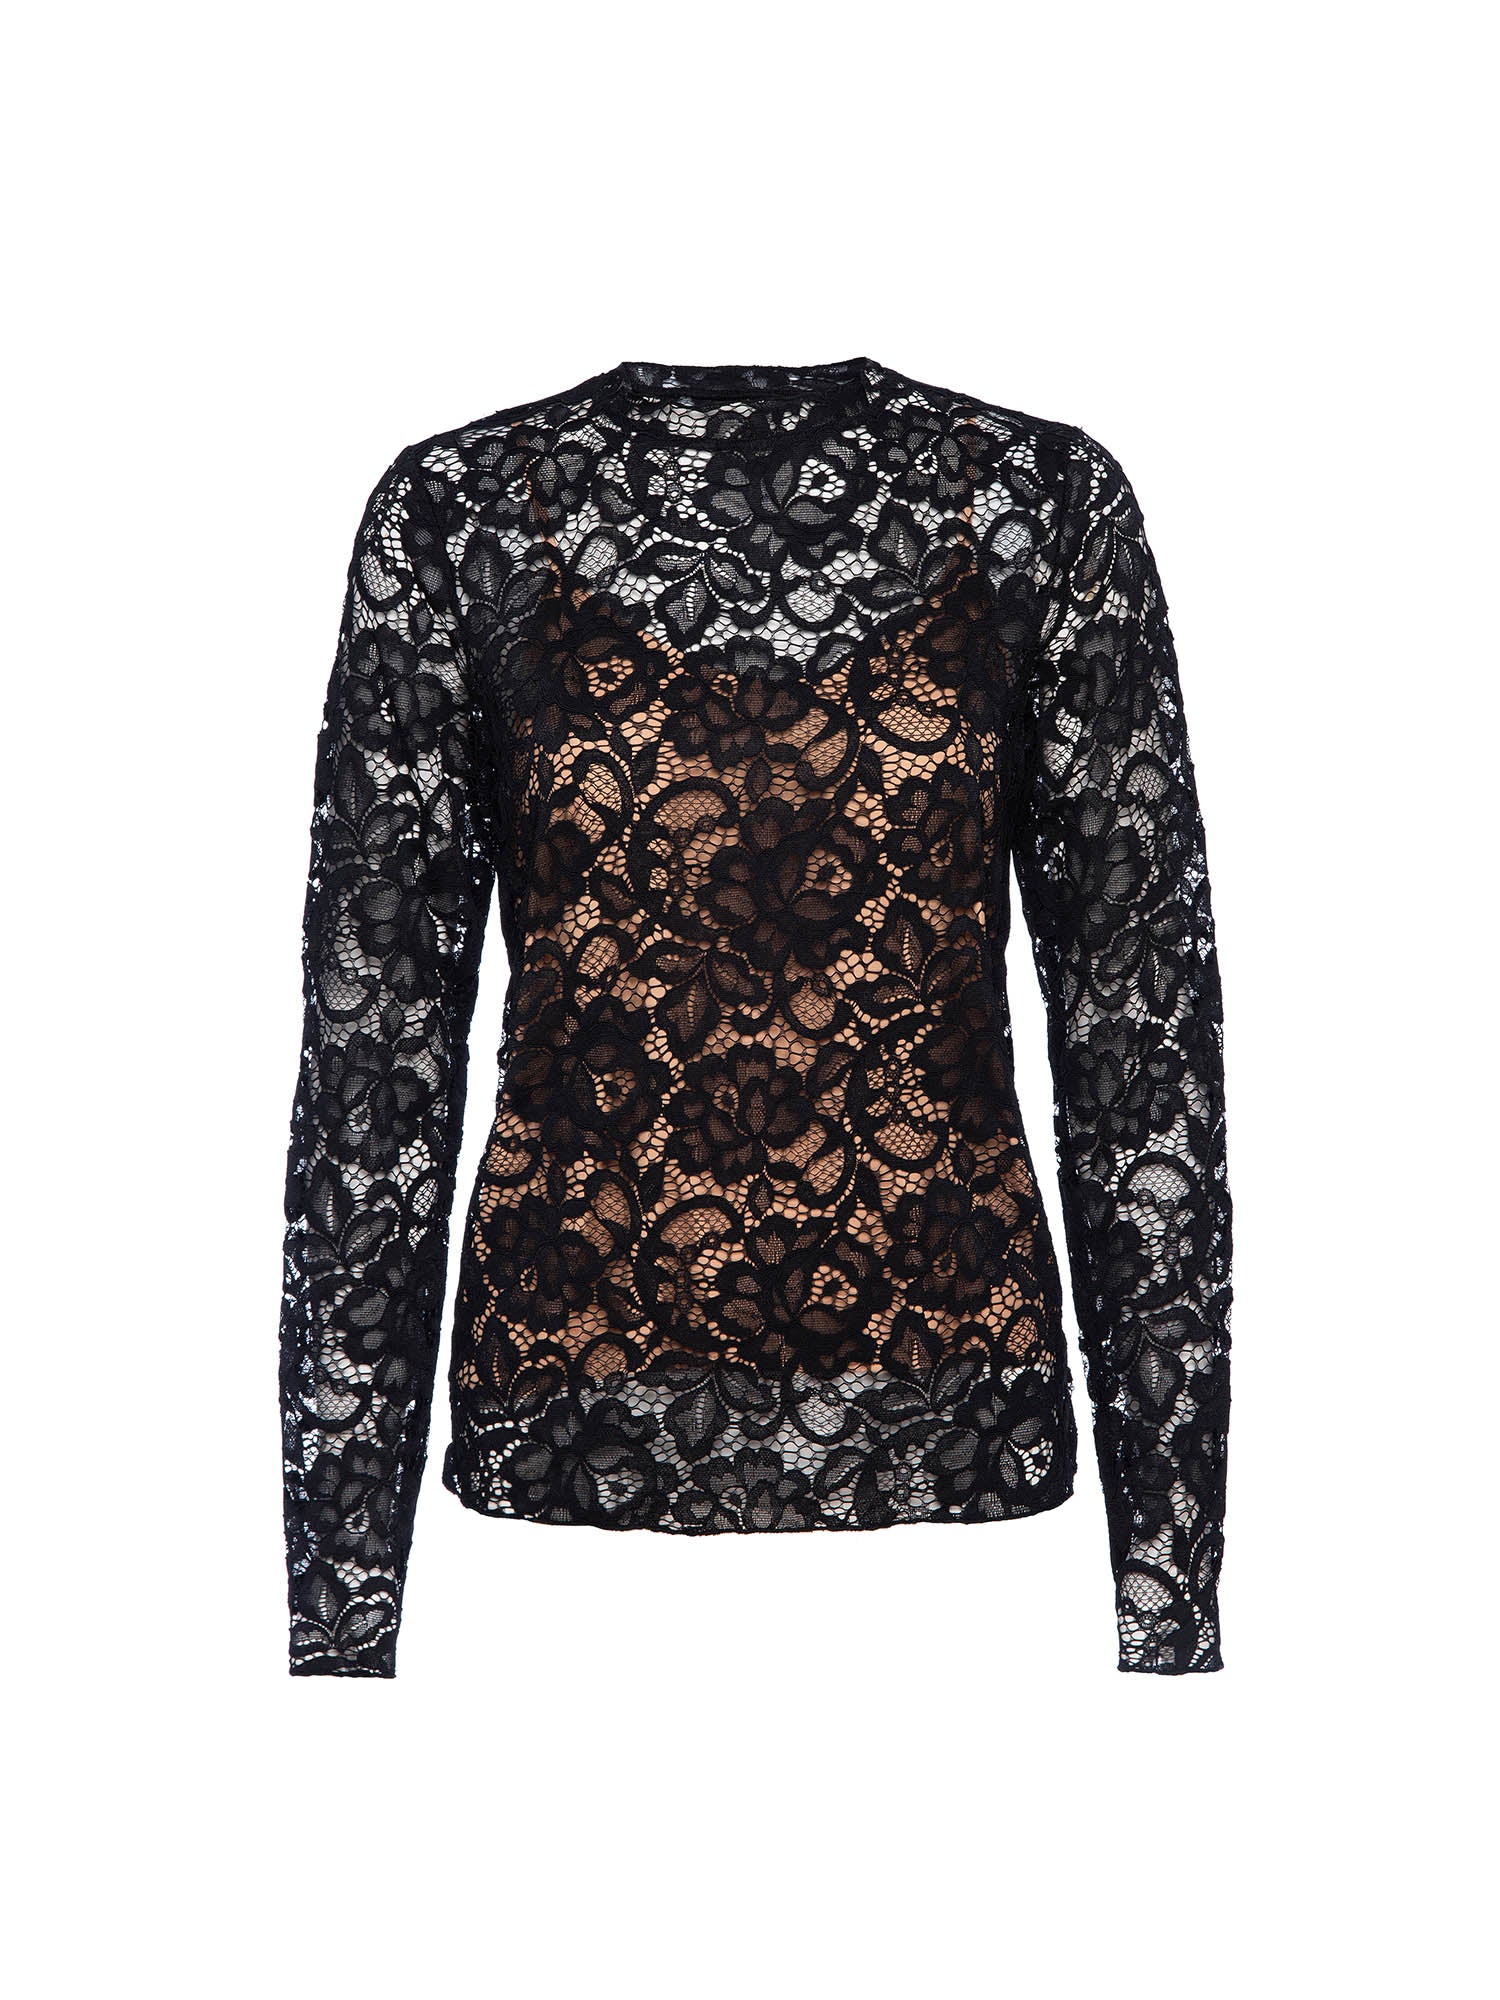 Donne black lace long sleeve top flat view